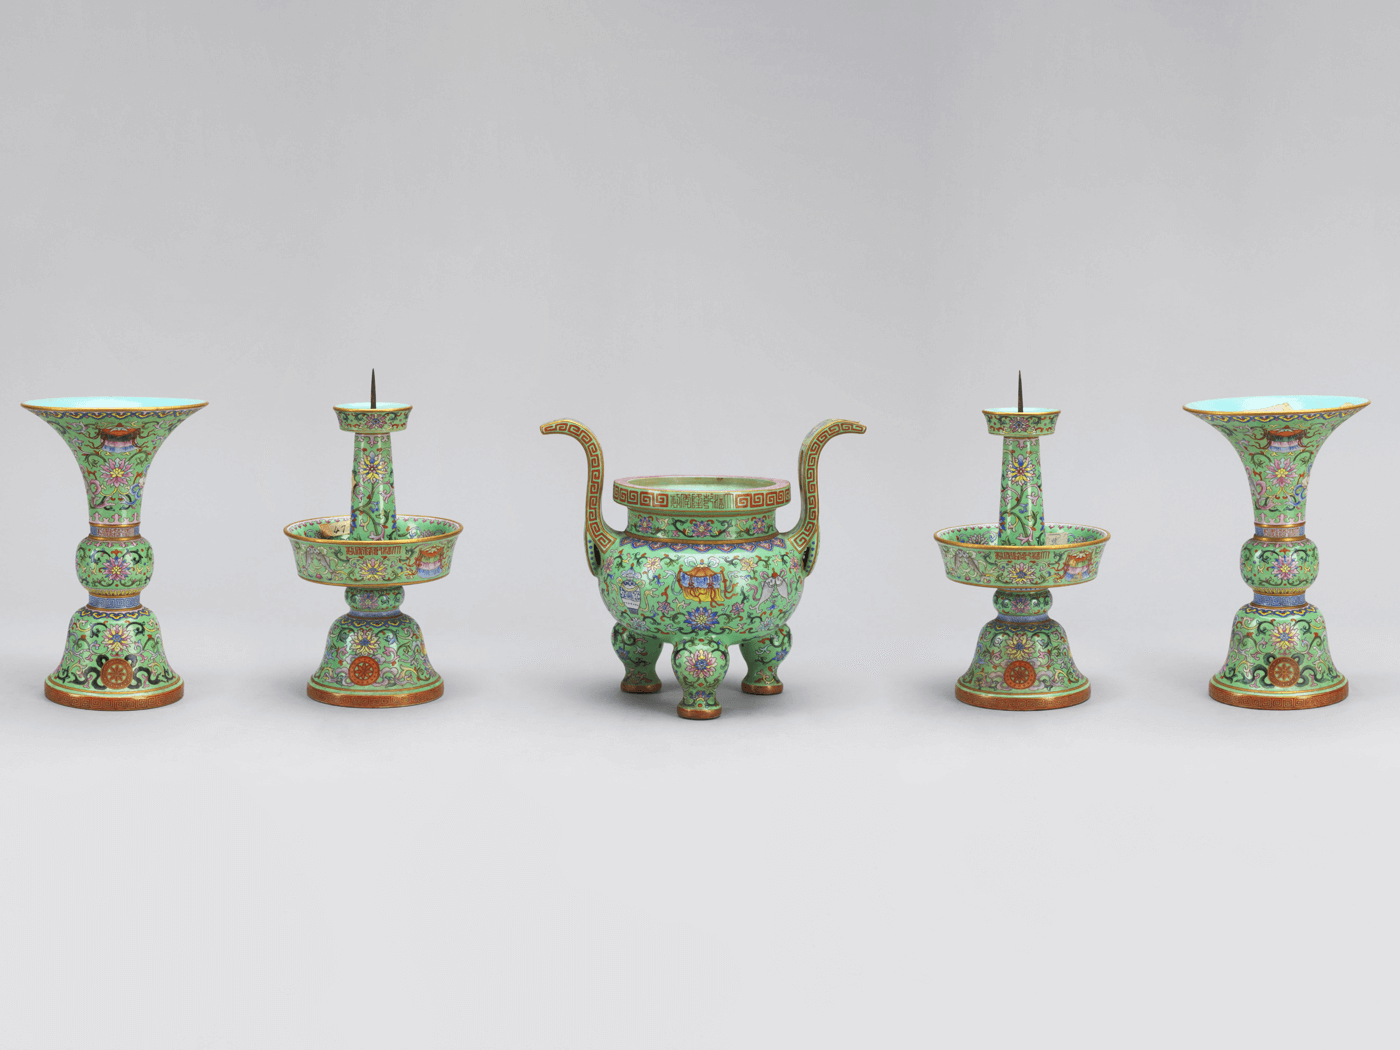 Five-piece altar set with lotuses and Buddhist treasures